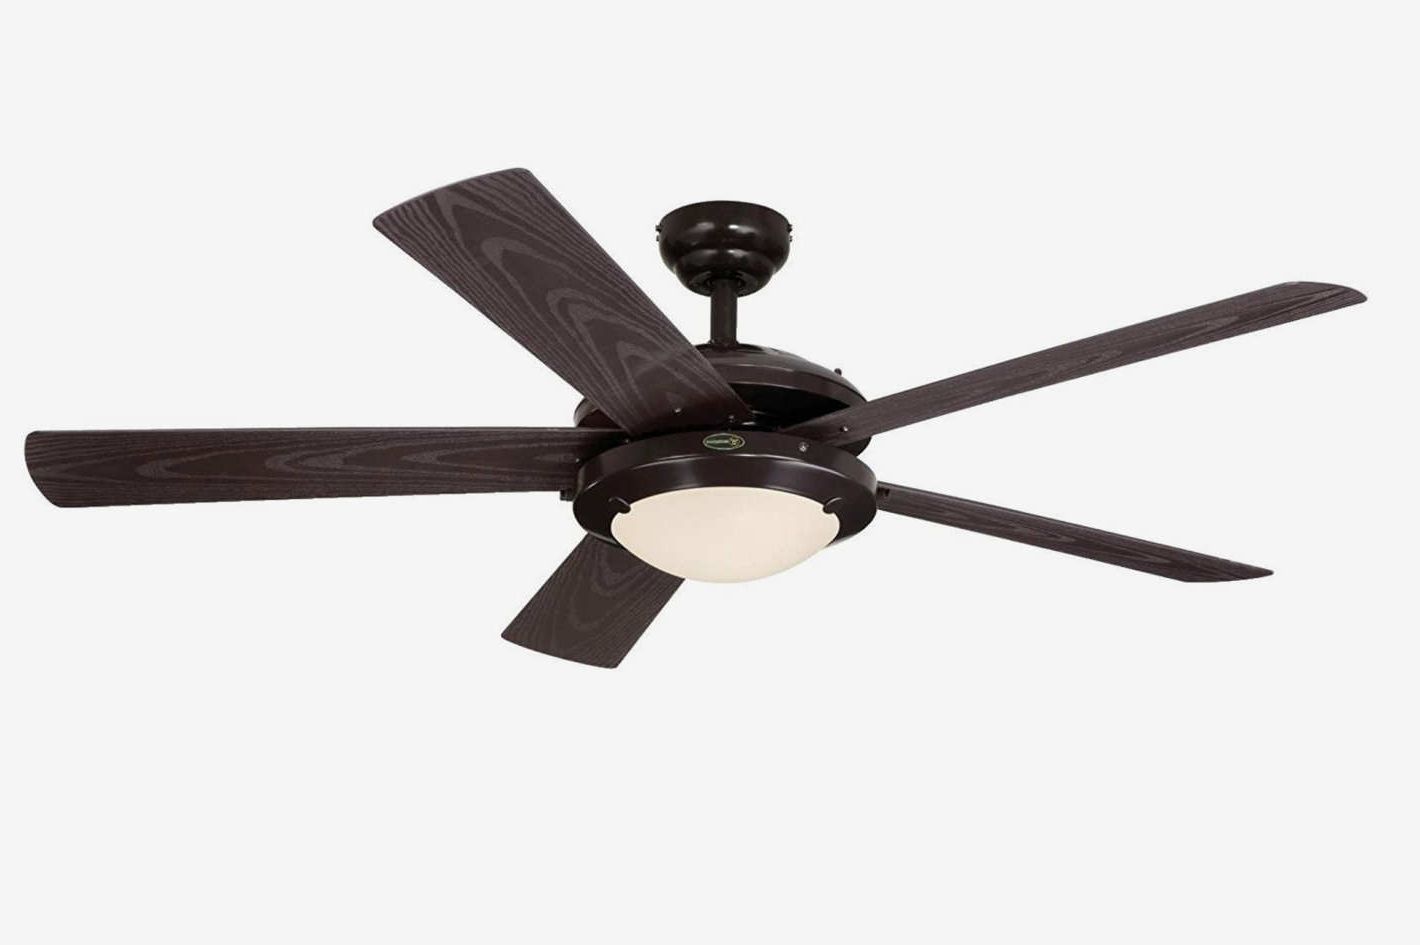 Outdoor Ceiling Fan With Bluetooth Speaker In 2019 The 9 Best Ceiling Fans On Amazon  (View 13 of 20)